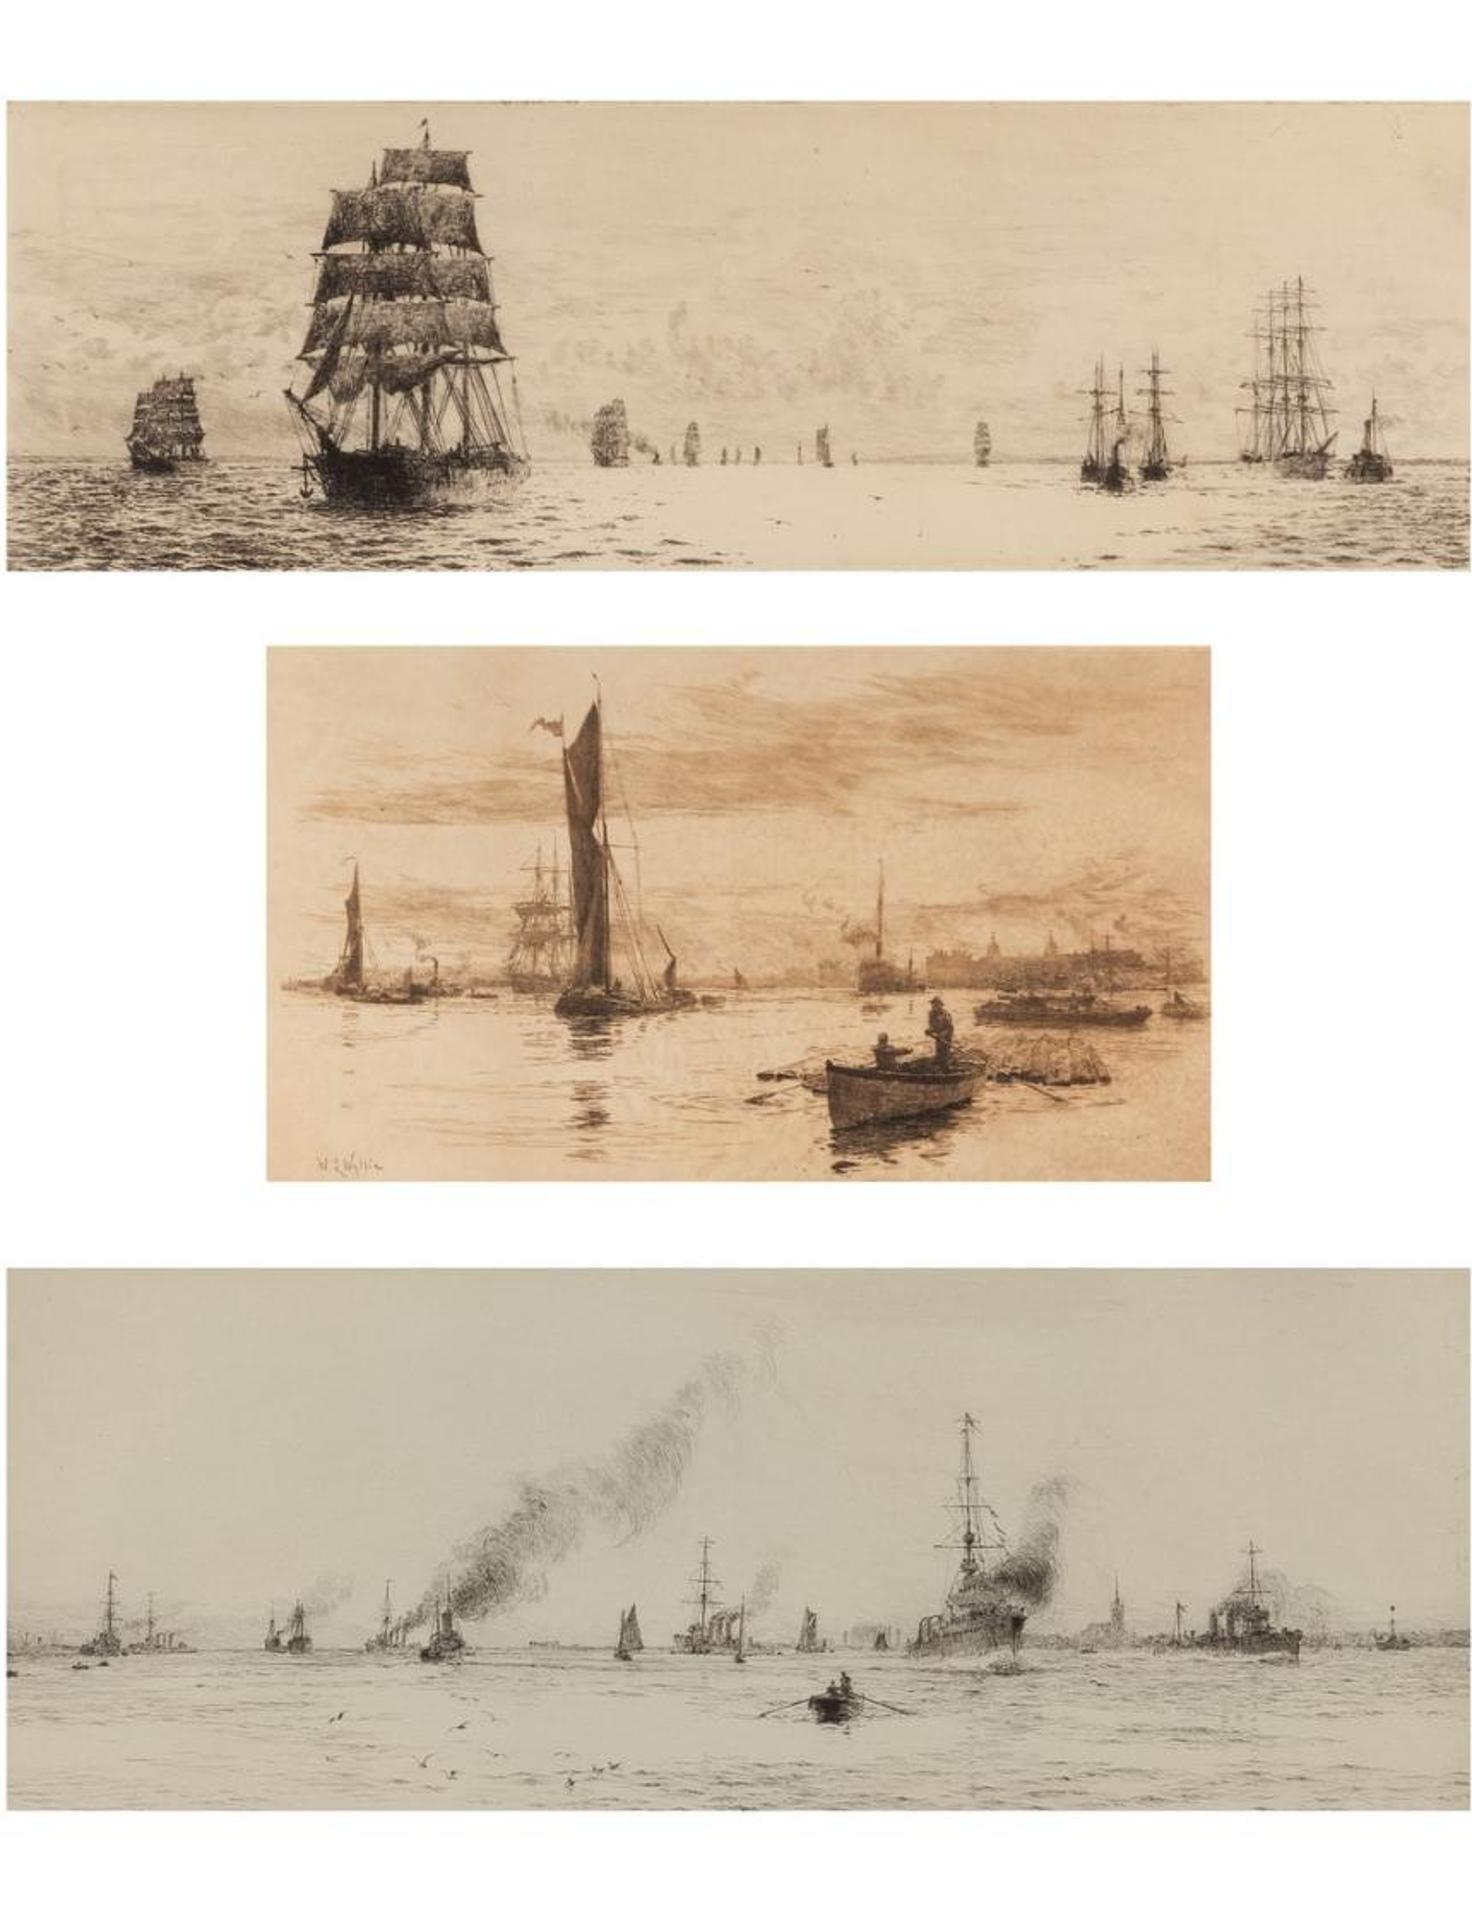 William Lionel Wyllie (1851-1931) - The Tidal Thames; Light Cruisers and destroyers at Hartwick & Norwegian Timber Ships